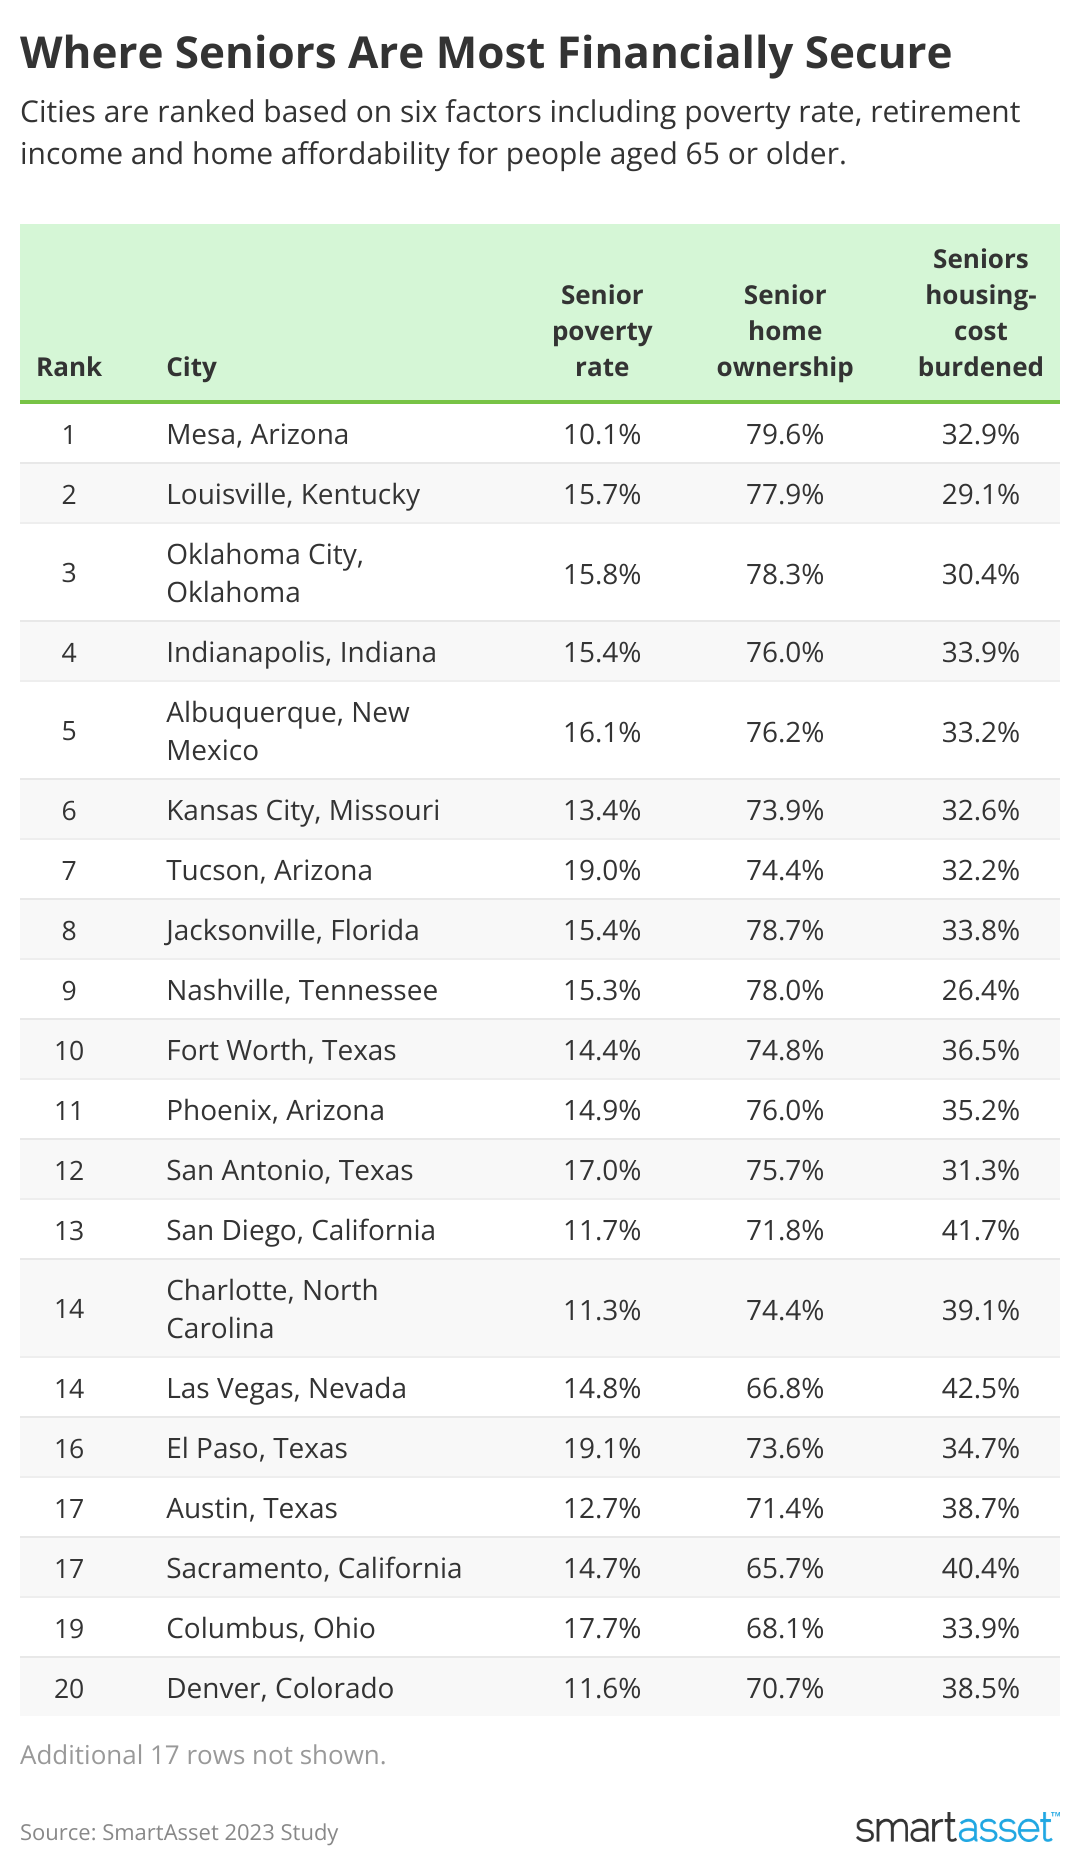 A chart showing the top cities where seniors are most financially secure